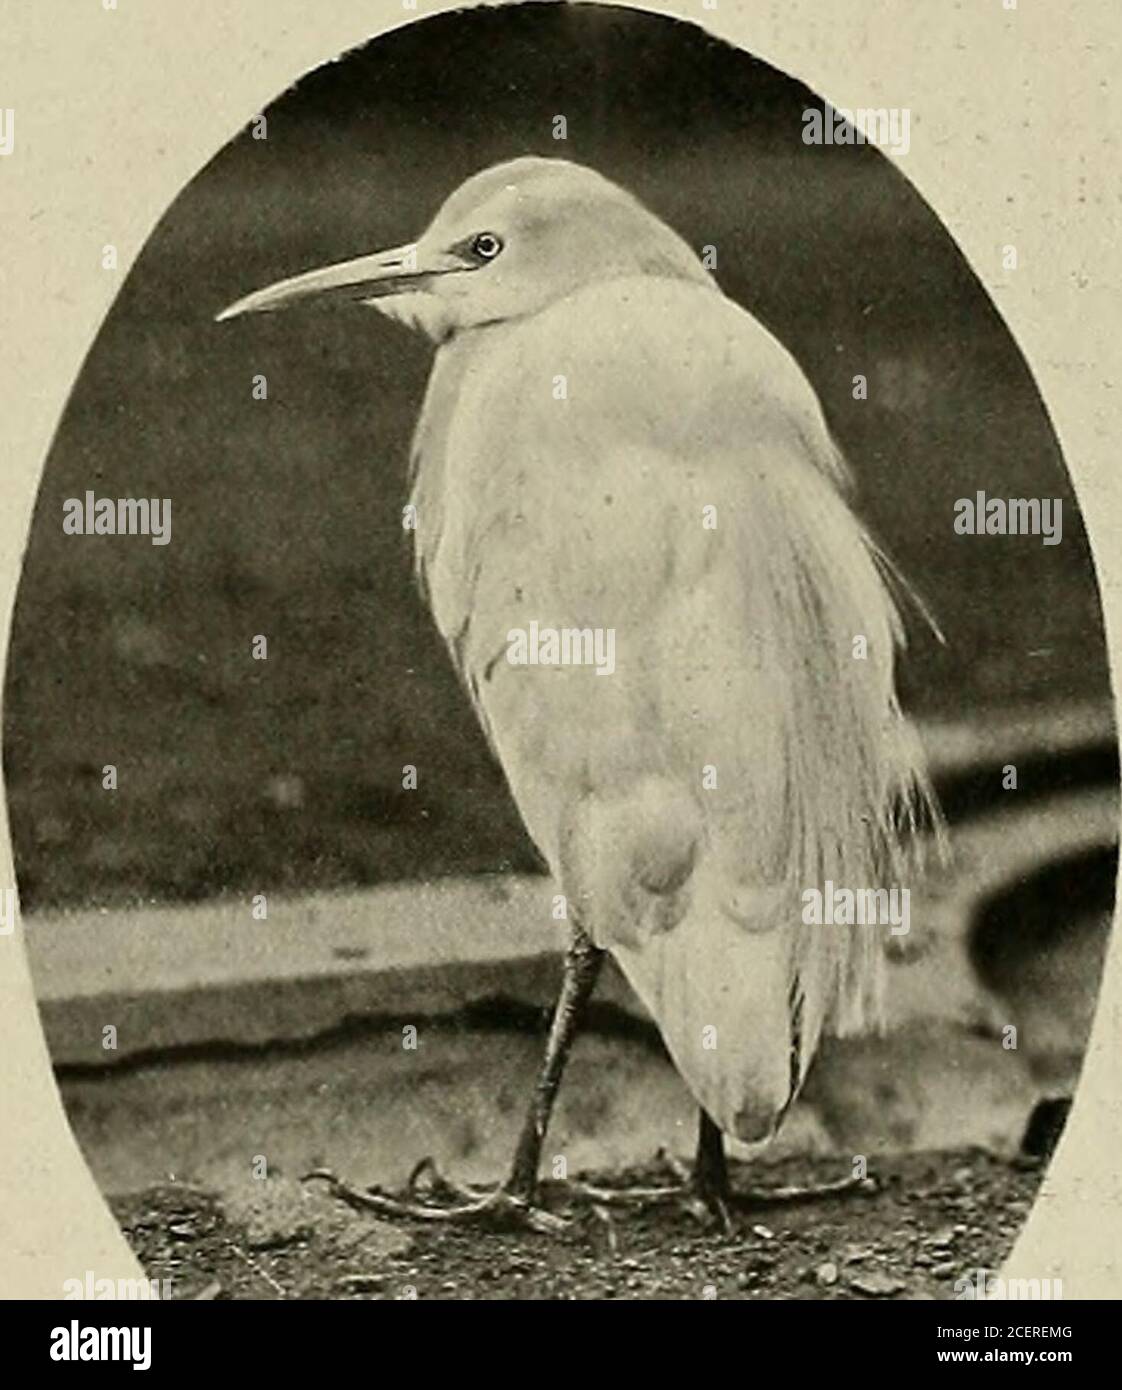 . Animal Life and the World of Nature; A magazine of Natural History. TATVXr EAGLE(Aqiiila rapax). C.4TTLE EGRET{BuhuX coromandus). 400 Animal Life insectivorous, feedingon frogs, locusts, andparticularly on wormsand larvEe turned upby the plough, aswell as on ticks fromthe backs of cattle,from which habit ittakes its name. The two thrushes here Thrushes- illustrated Whistling and are very Laughing, beautifuladditions to the WesternAviary, and were alsopresentations to theSociety by Mr. Harper.The Blue WhistlmgThrush (Myioplwnuscmruleus) is a native ofChina, and new to theSocietys collection.T Stock Photo